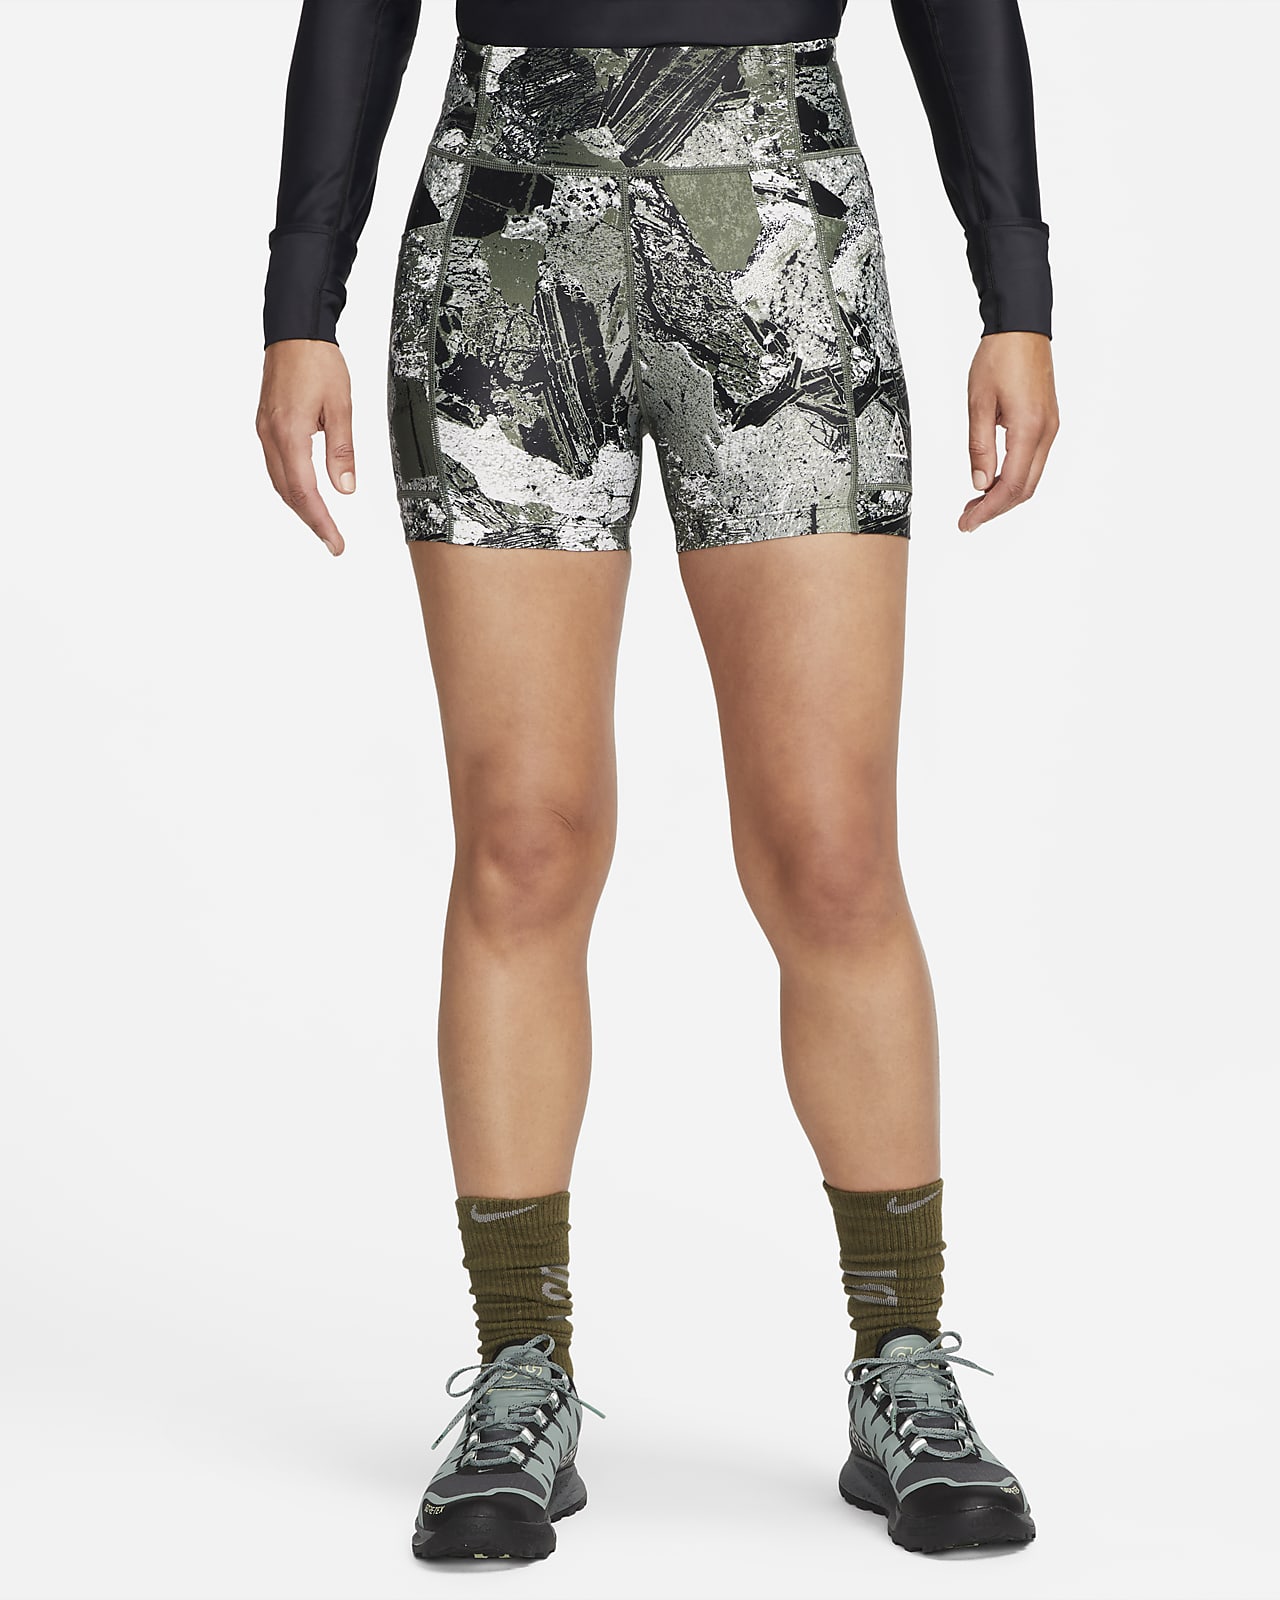 Nike ACG Dri-FIT ADV 'Crater Lookout' Women's All-Over Print Shorts